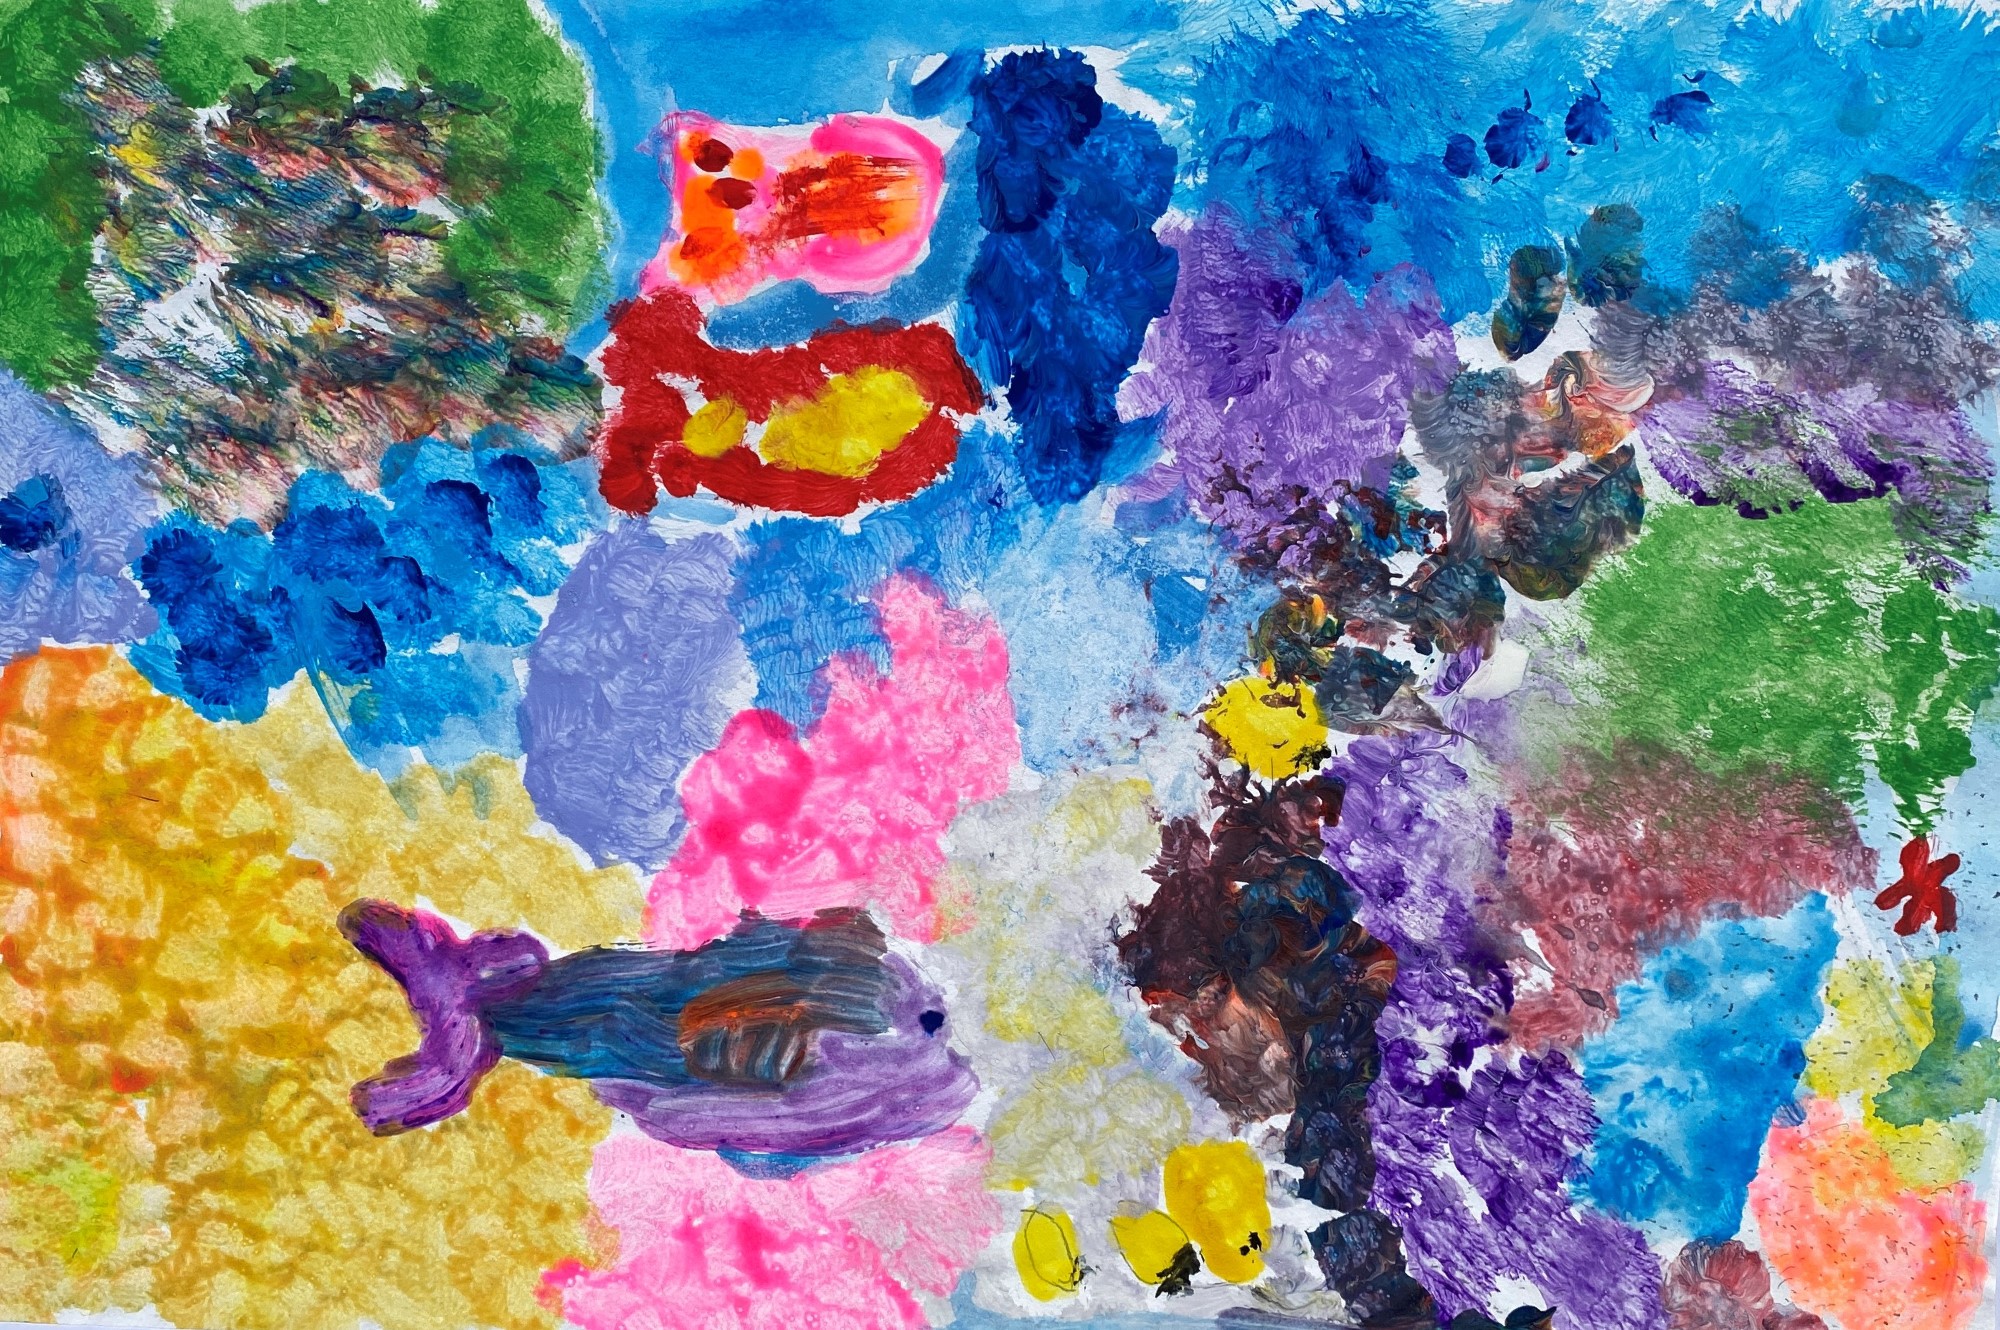 student artwork - the reef